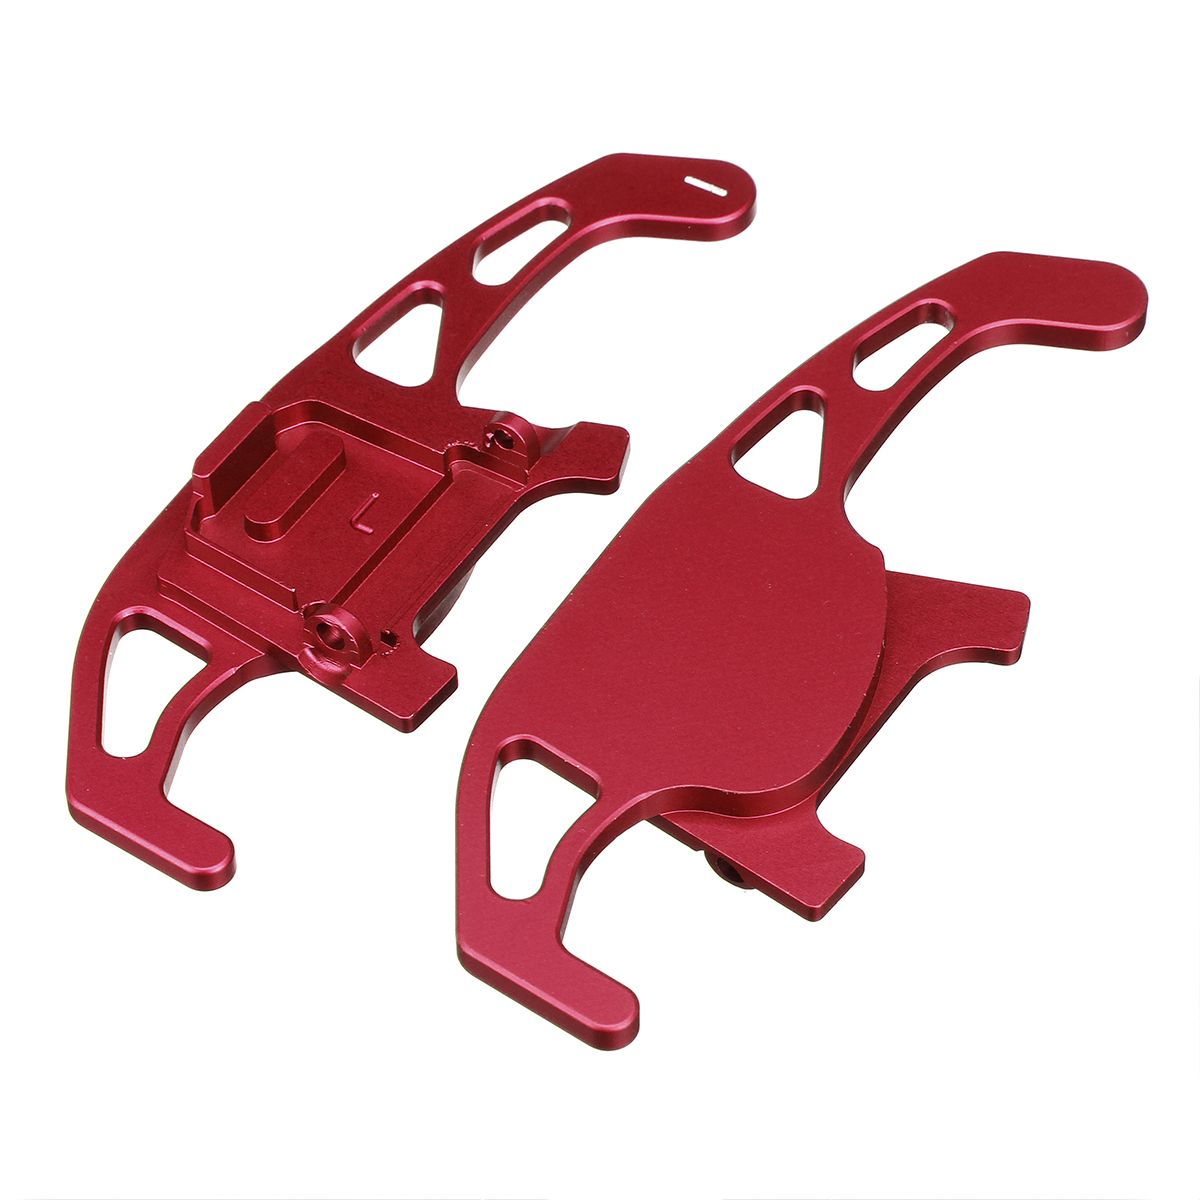 2Pcs-Car-Steering-Wheel-Paddle-Extend-Shifter-Replacement-Red-For-VW-GOLF-GTI-R-GTD-GTE-MK7-7-POLO-G-1656105